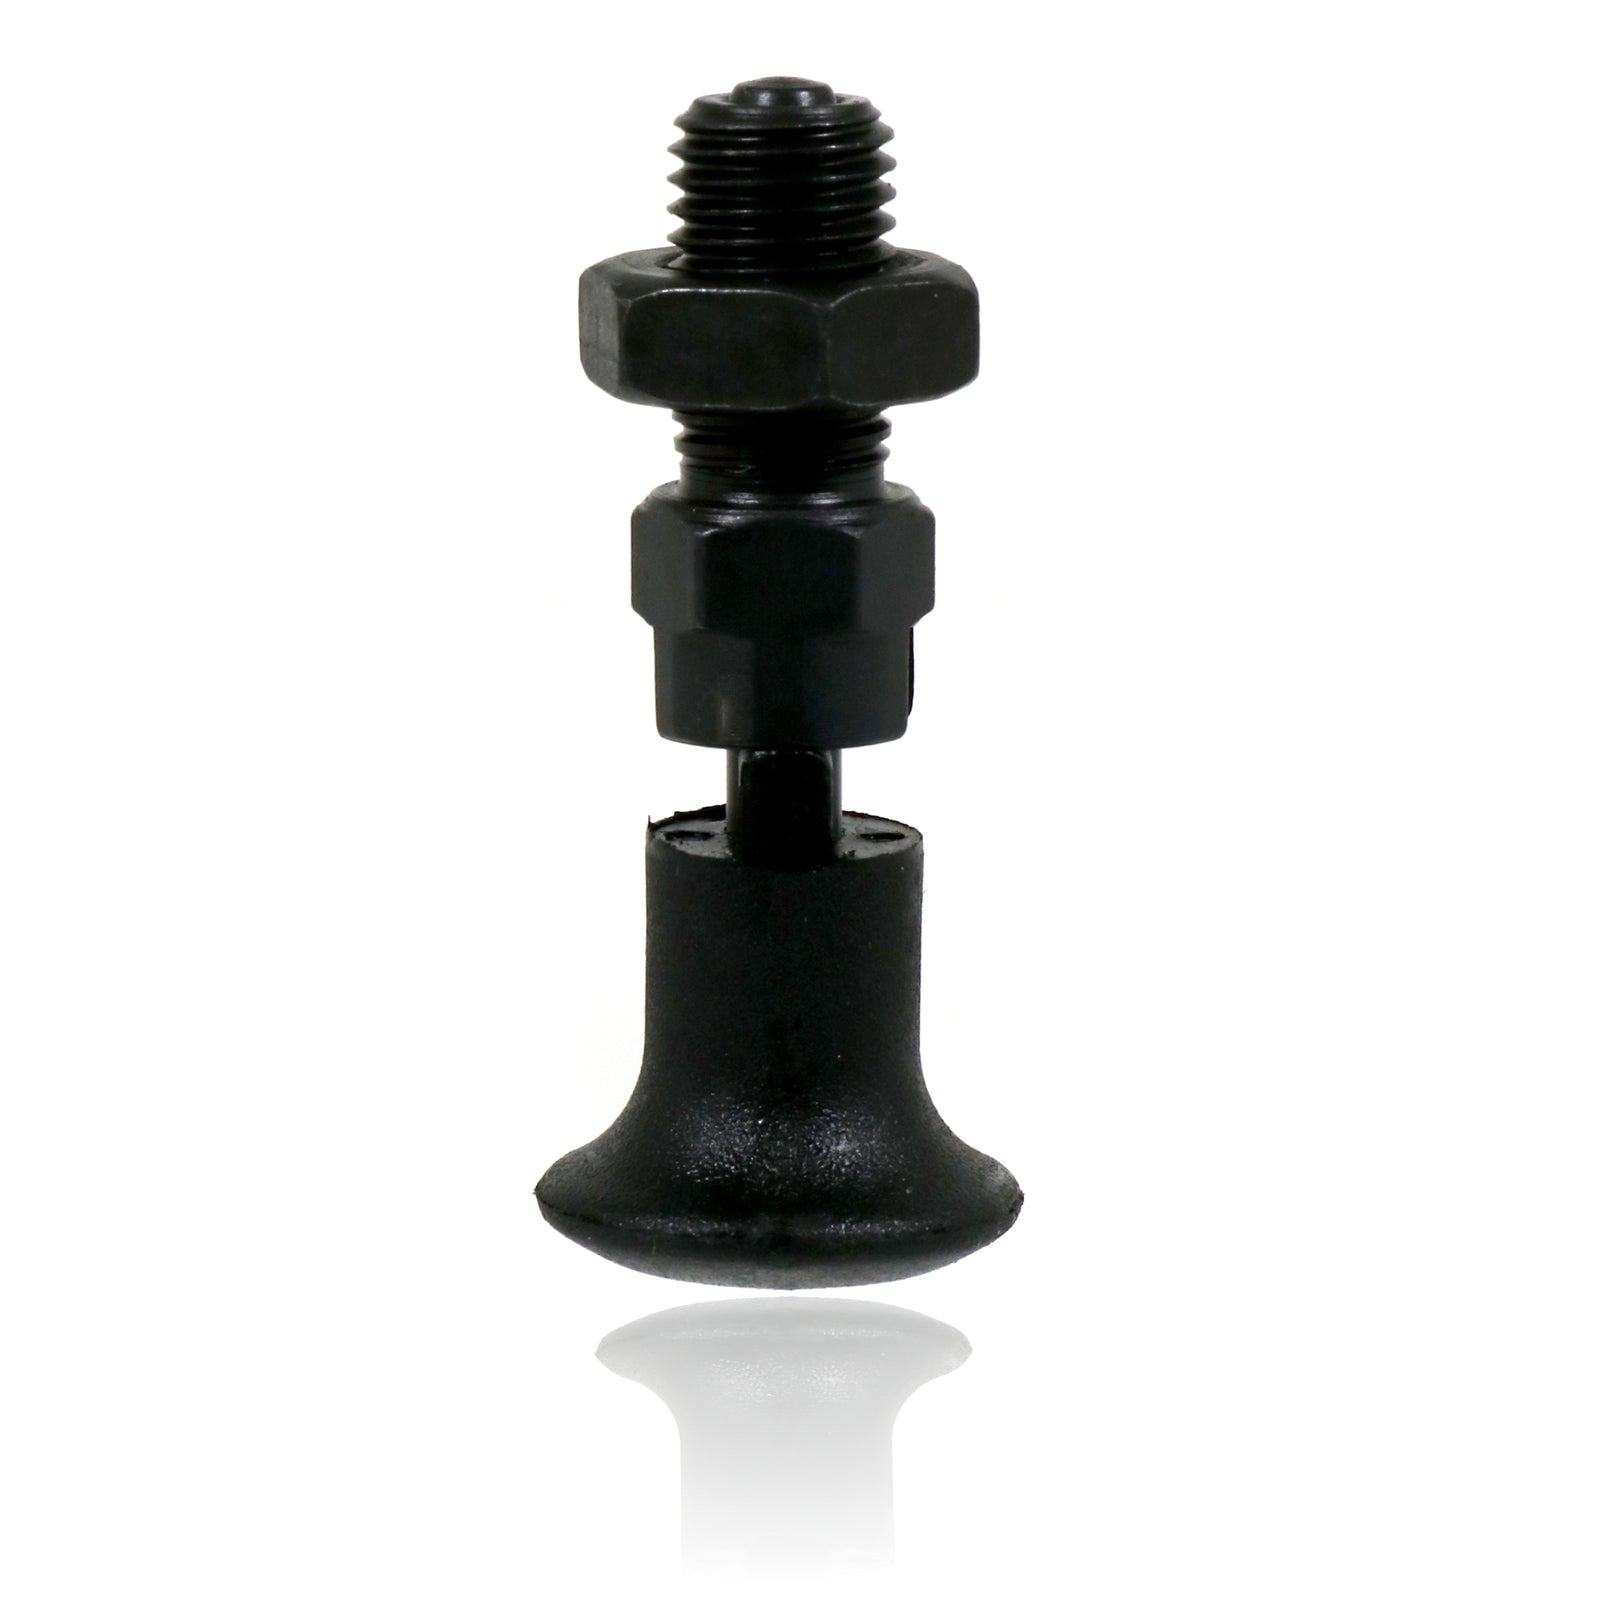 M12 Index Plunger Spring Loaded with Rest Position Locking Pin Blackened Steel